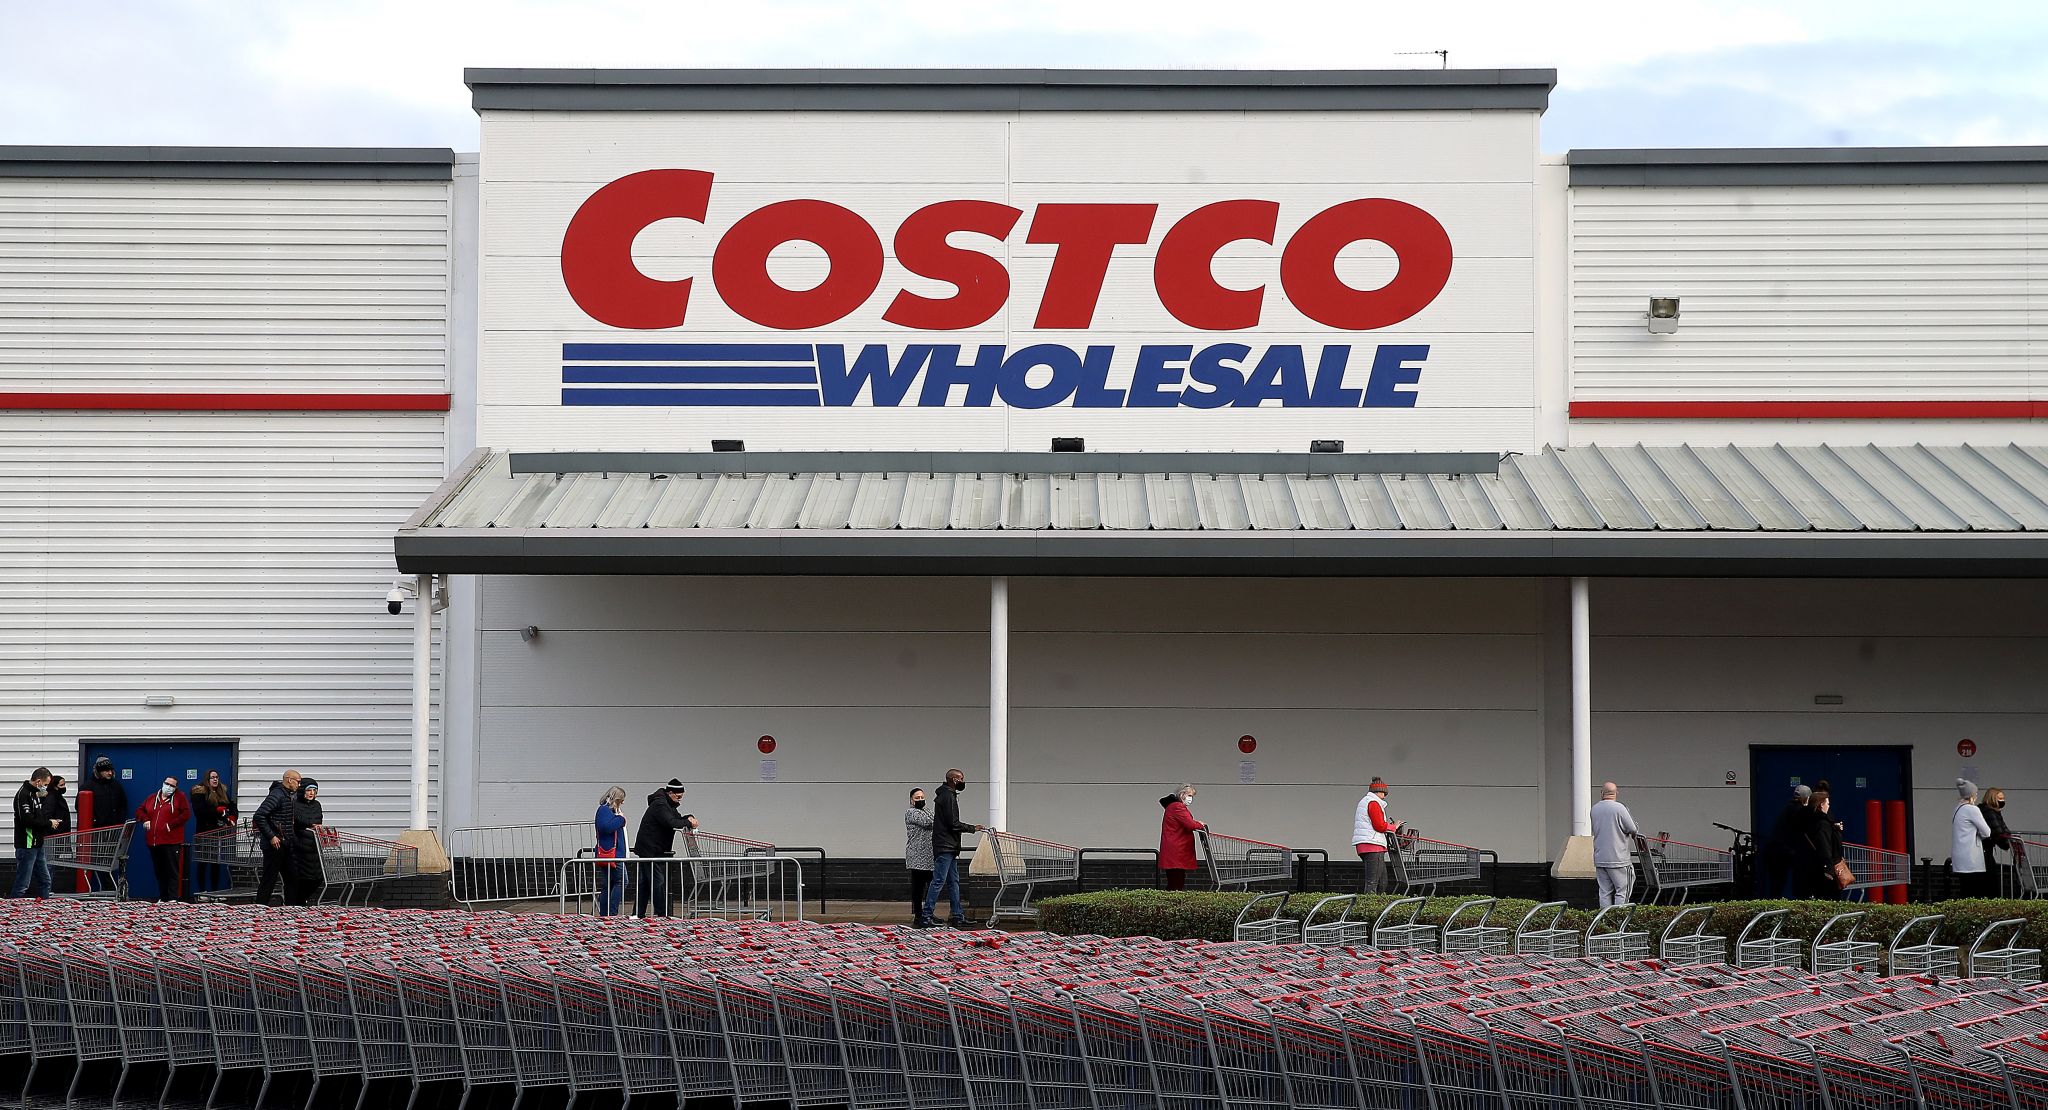 Sam's Club Vs. Costco: Why I prefer Costco after trying both